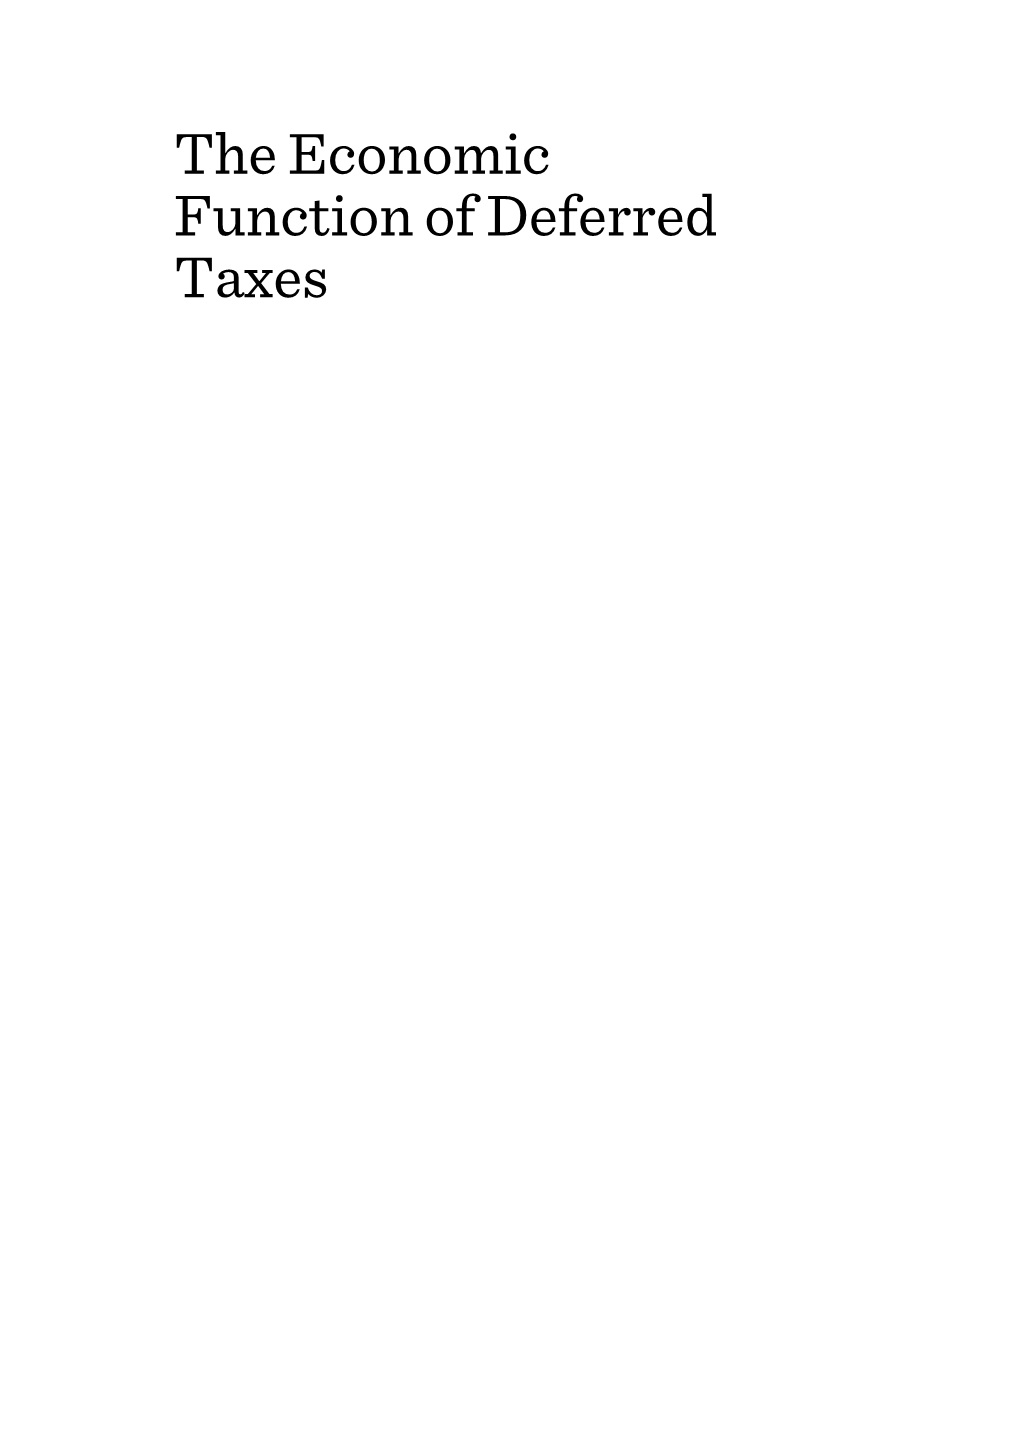 The Economic Function of Deferred Taxes